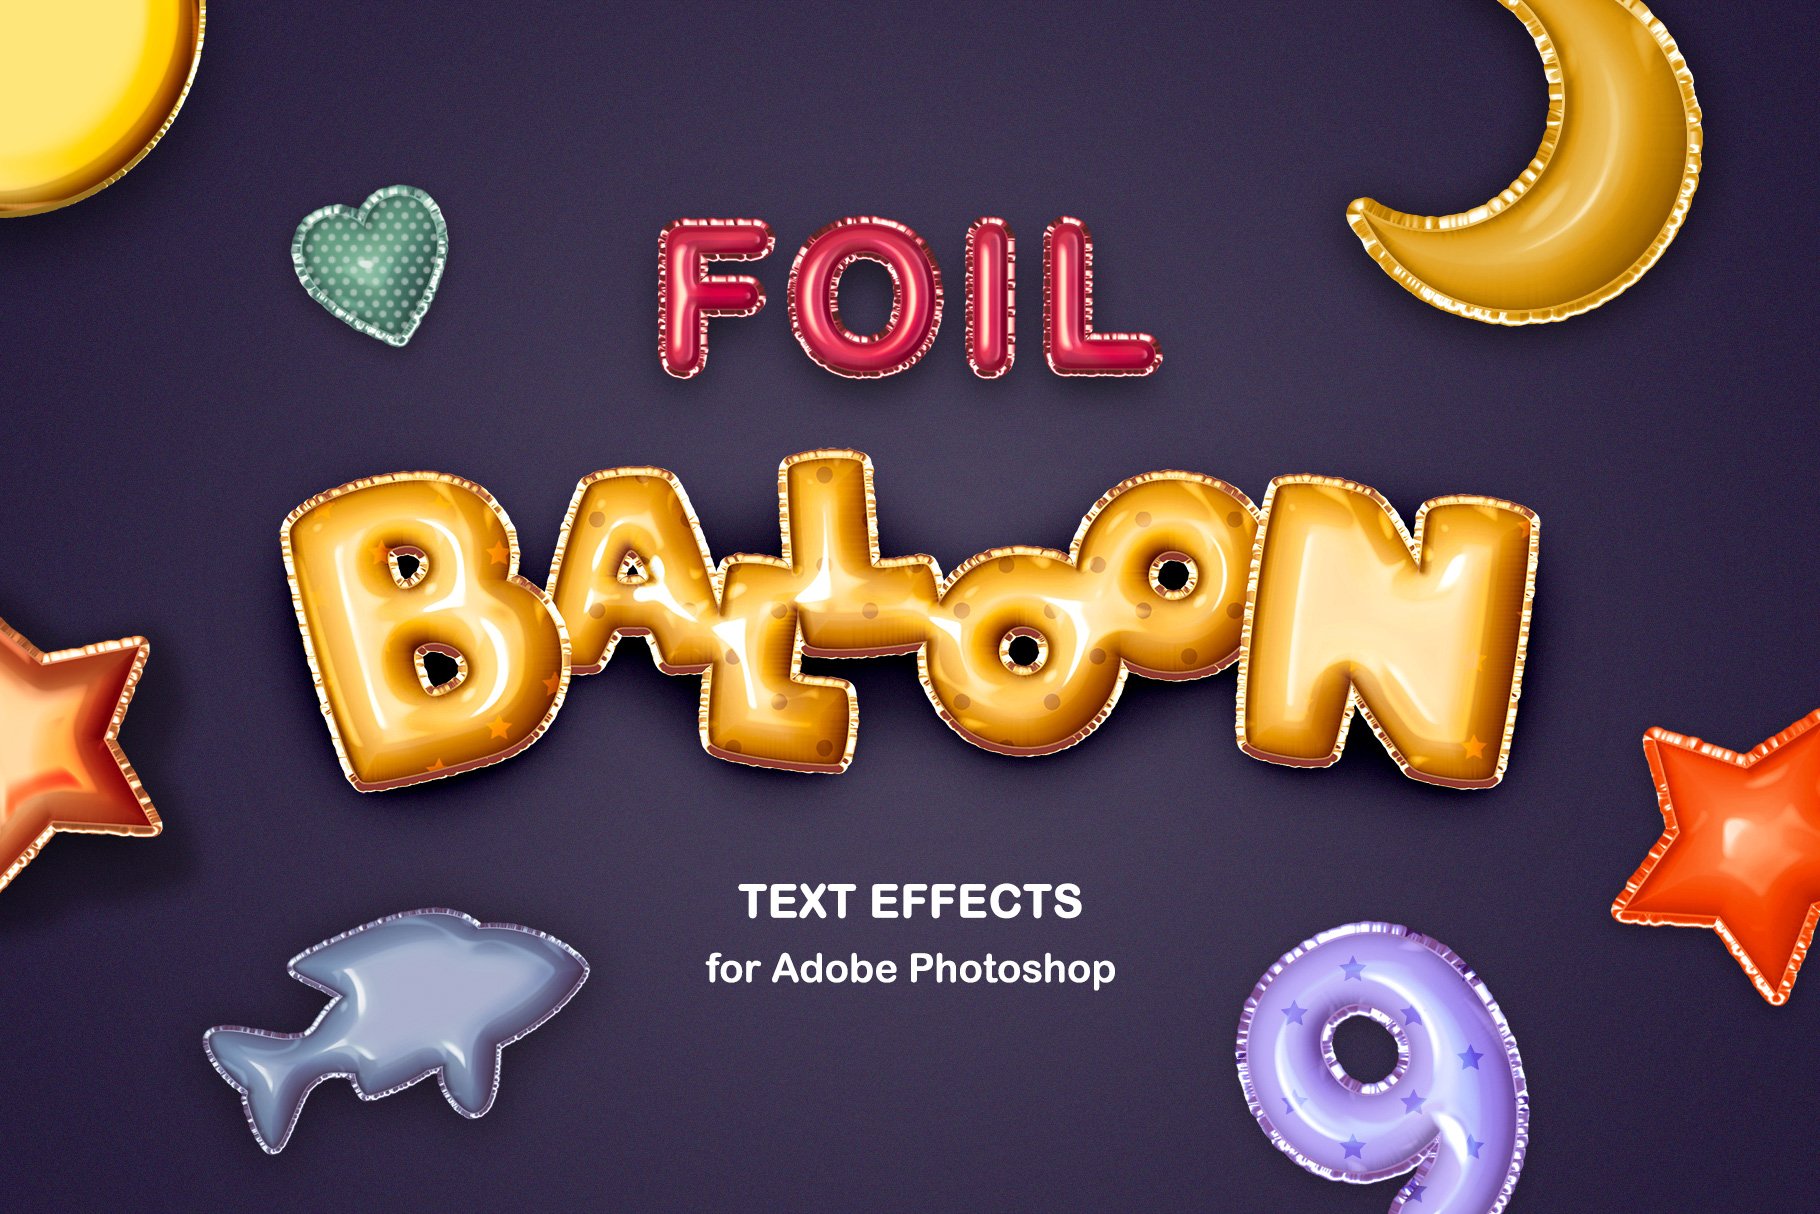 Foil Balloon Text Effectscover image.